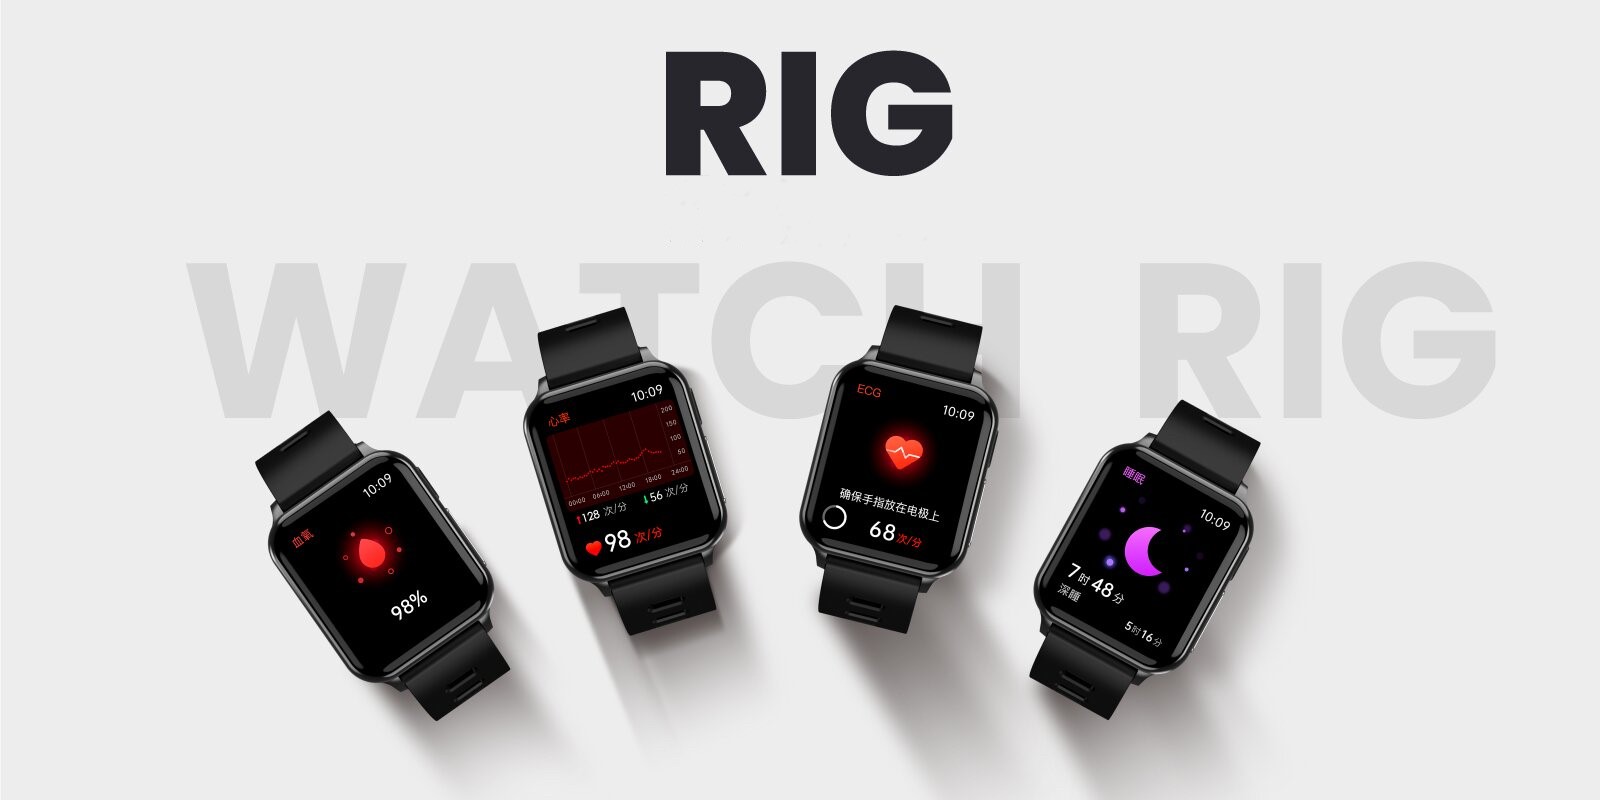 Health Monitoring - RIG Smartwatch, share you a smart & health life style